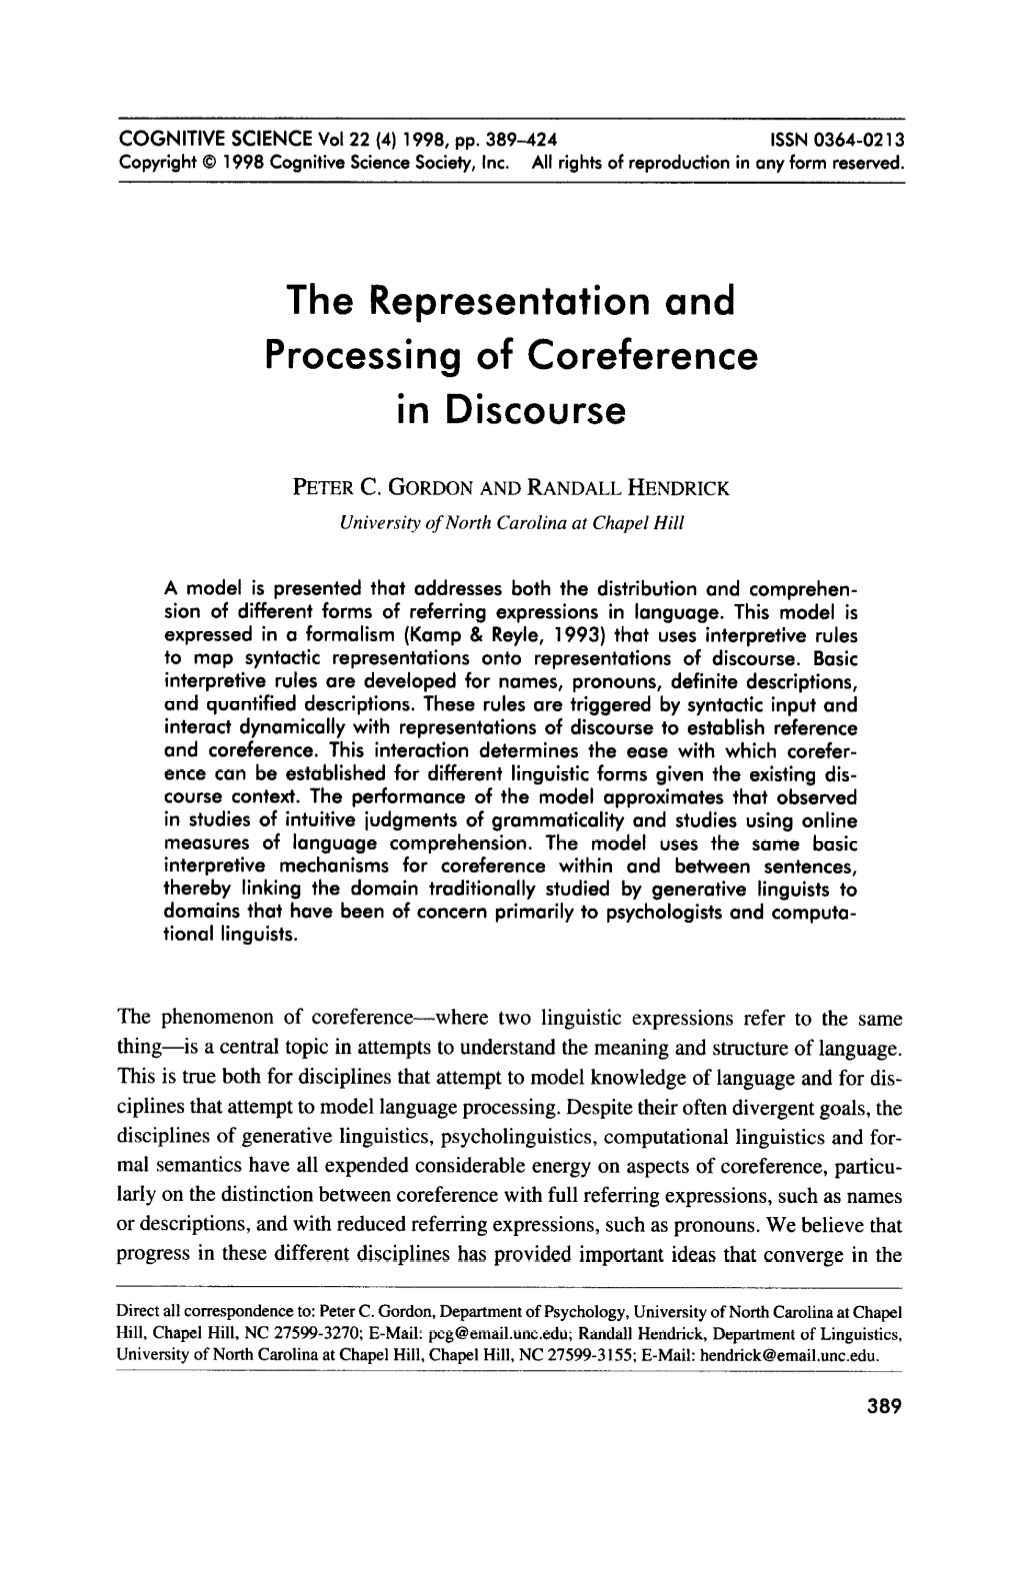 The Representation and Processing of Coreference in Discourse